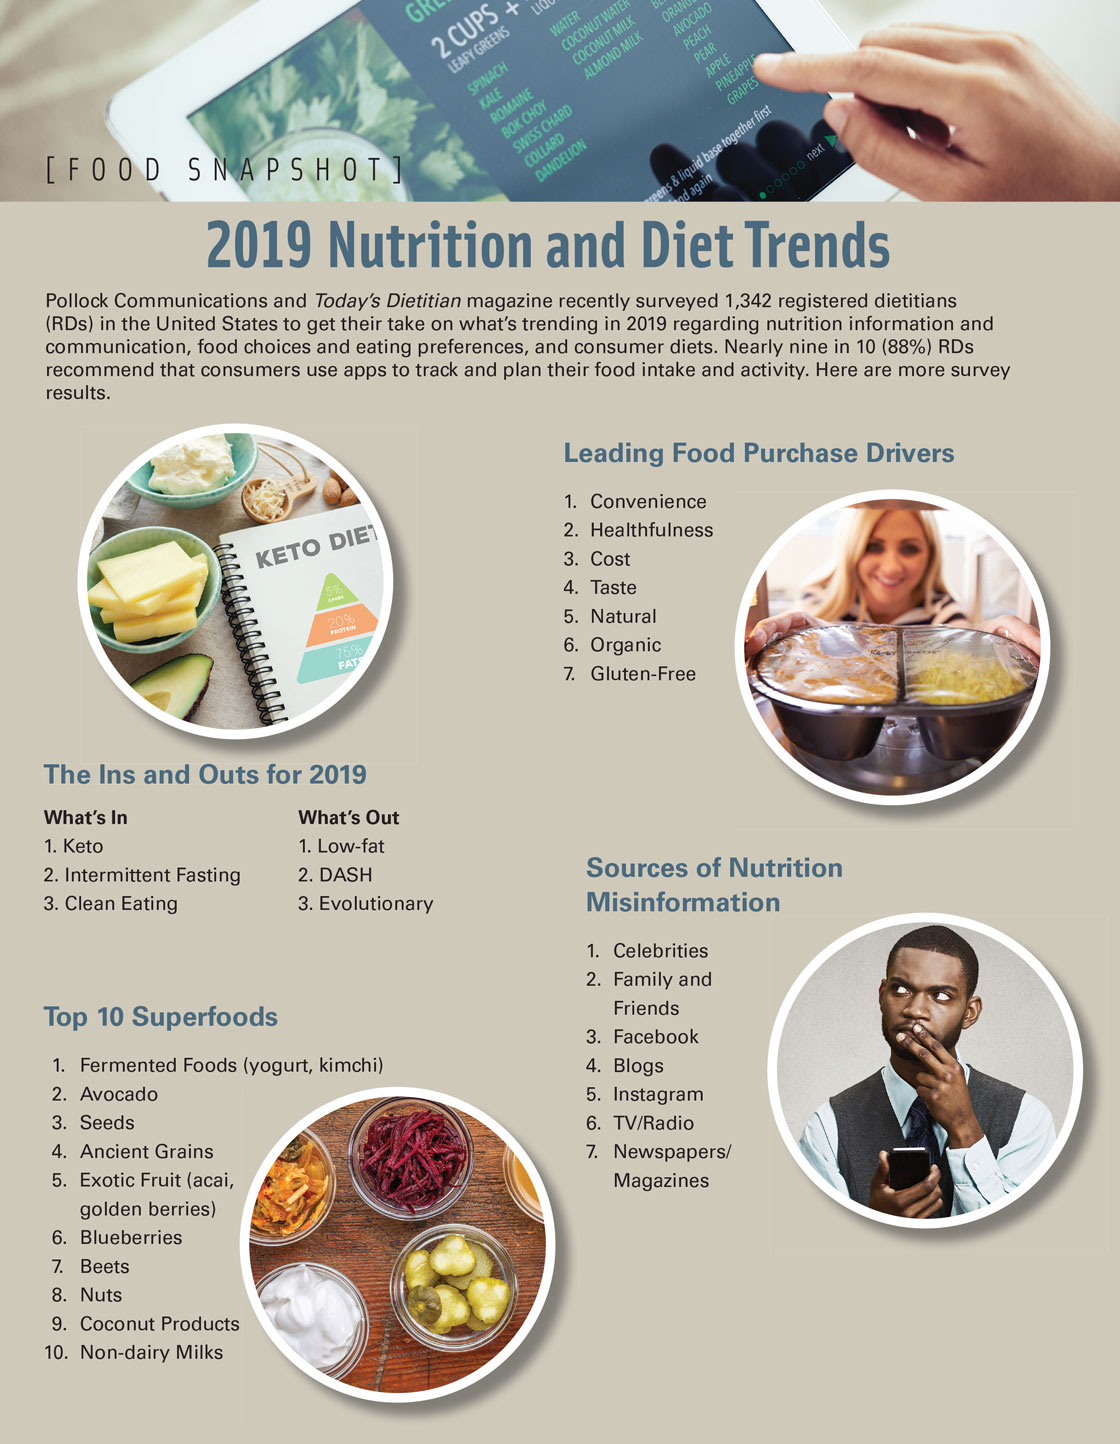 2019 Nutrition and Diet Trends. Source: What’s Trending in Nutrition, Pollock Communications and Today’s Dietitian. 